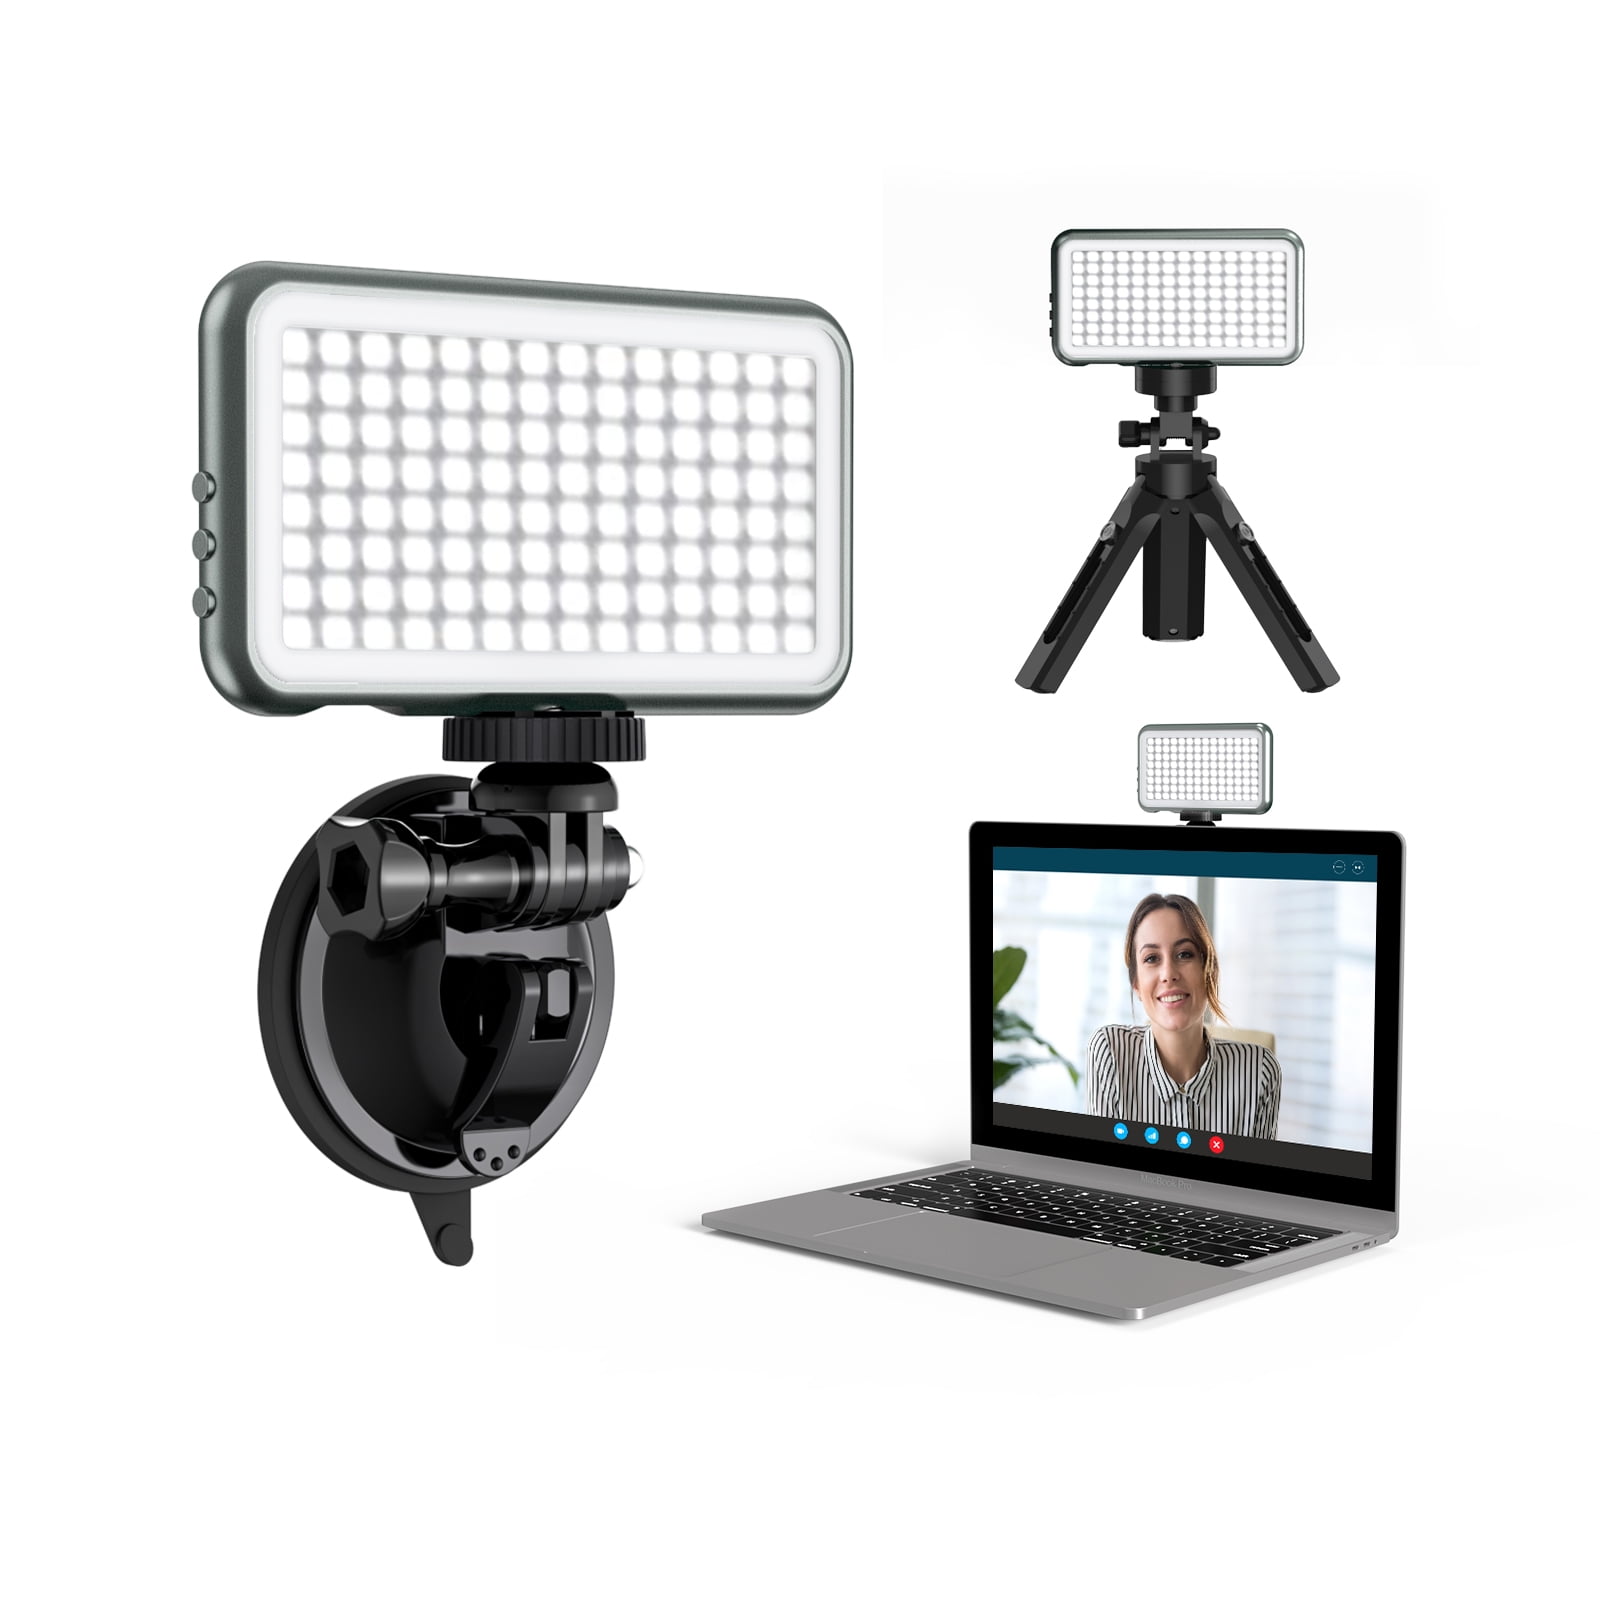 Self Broadcasting and Live Streaming Jelly Comb Bicolor LED Light for Video Conference Zoom Call Remote Working Video Conference Lighting Kit 